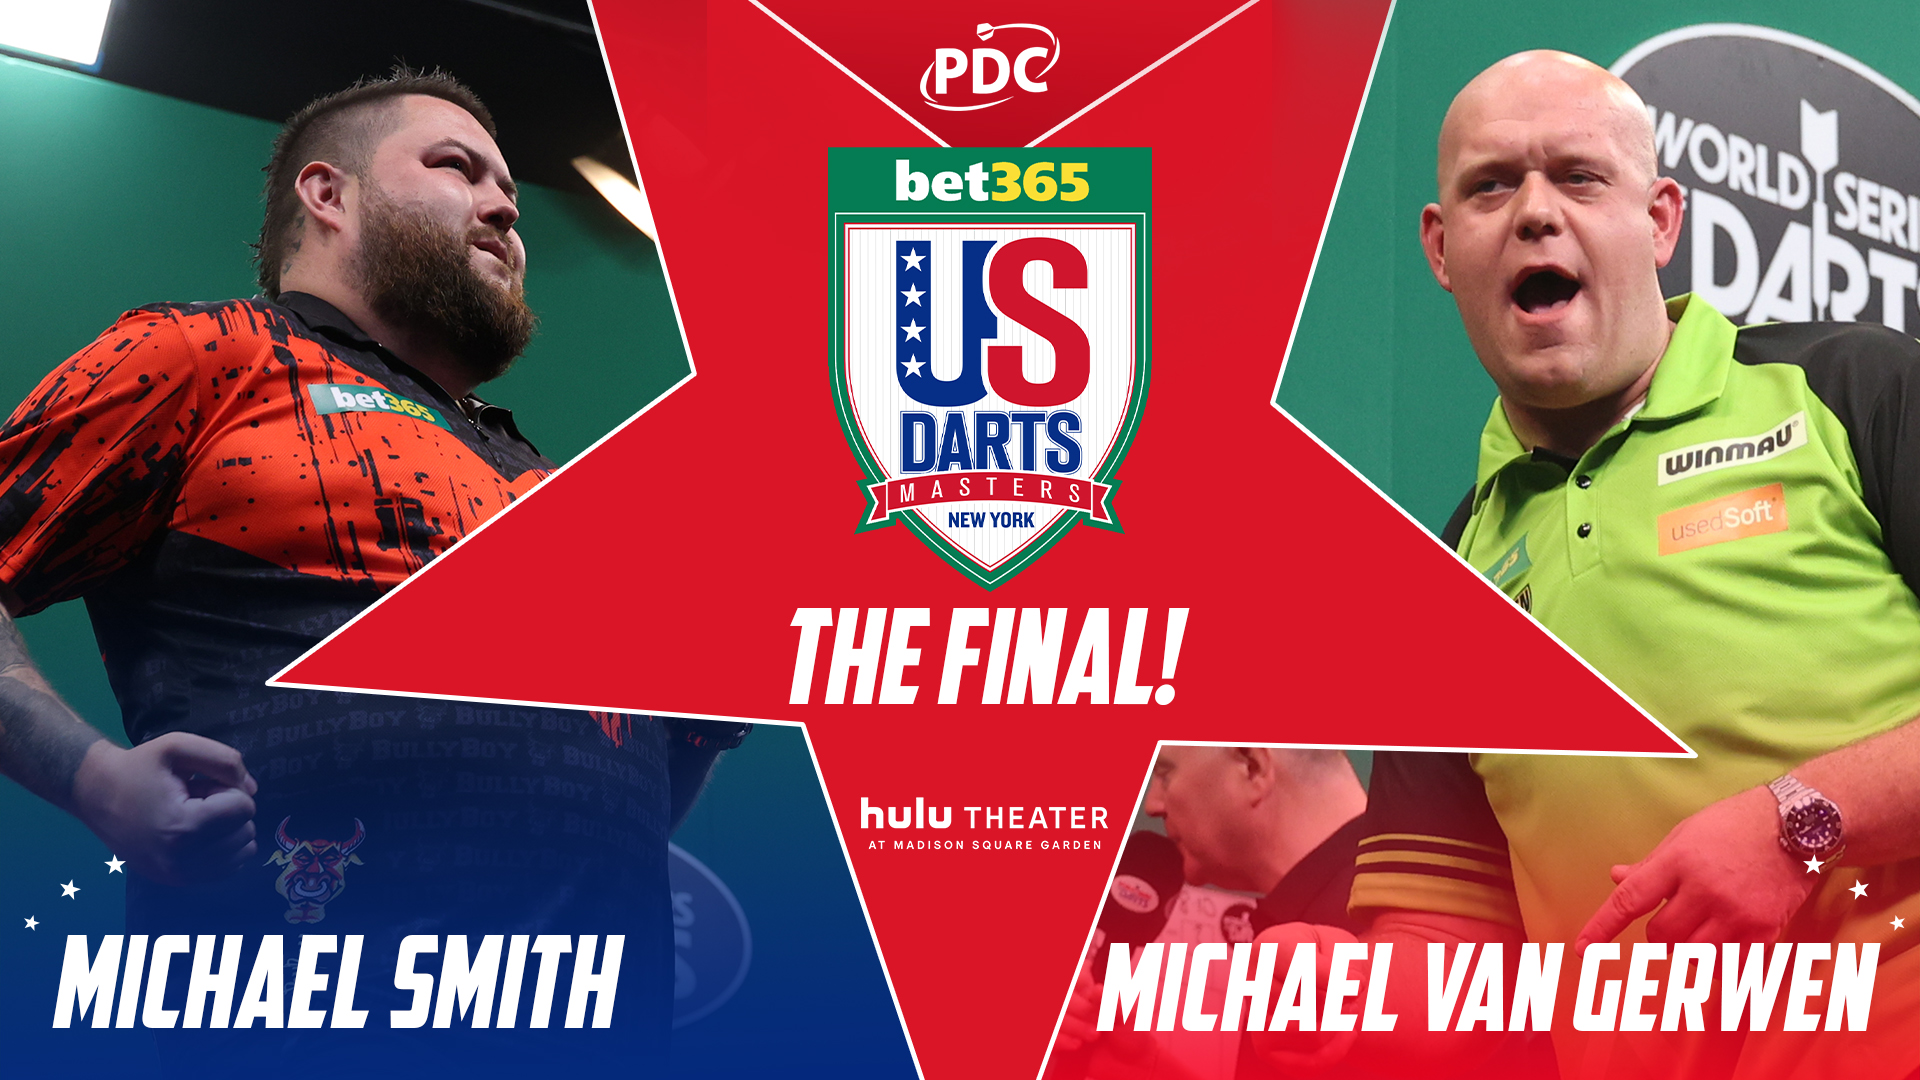 ~ side lykke Forstyrre PDC Darts on Twitter: "THE FINAL 🏆 Will it be Bully Boy in the Big Apple,  or is it MvG's time at MSG? The final of the 2022 @bet365 US Darts Masters